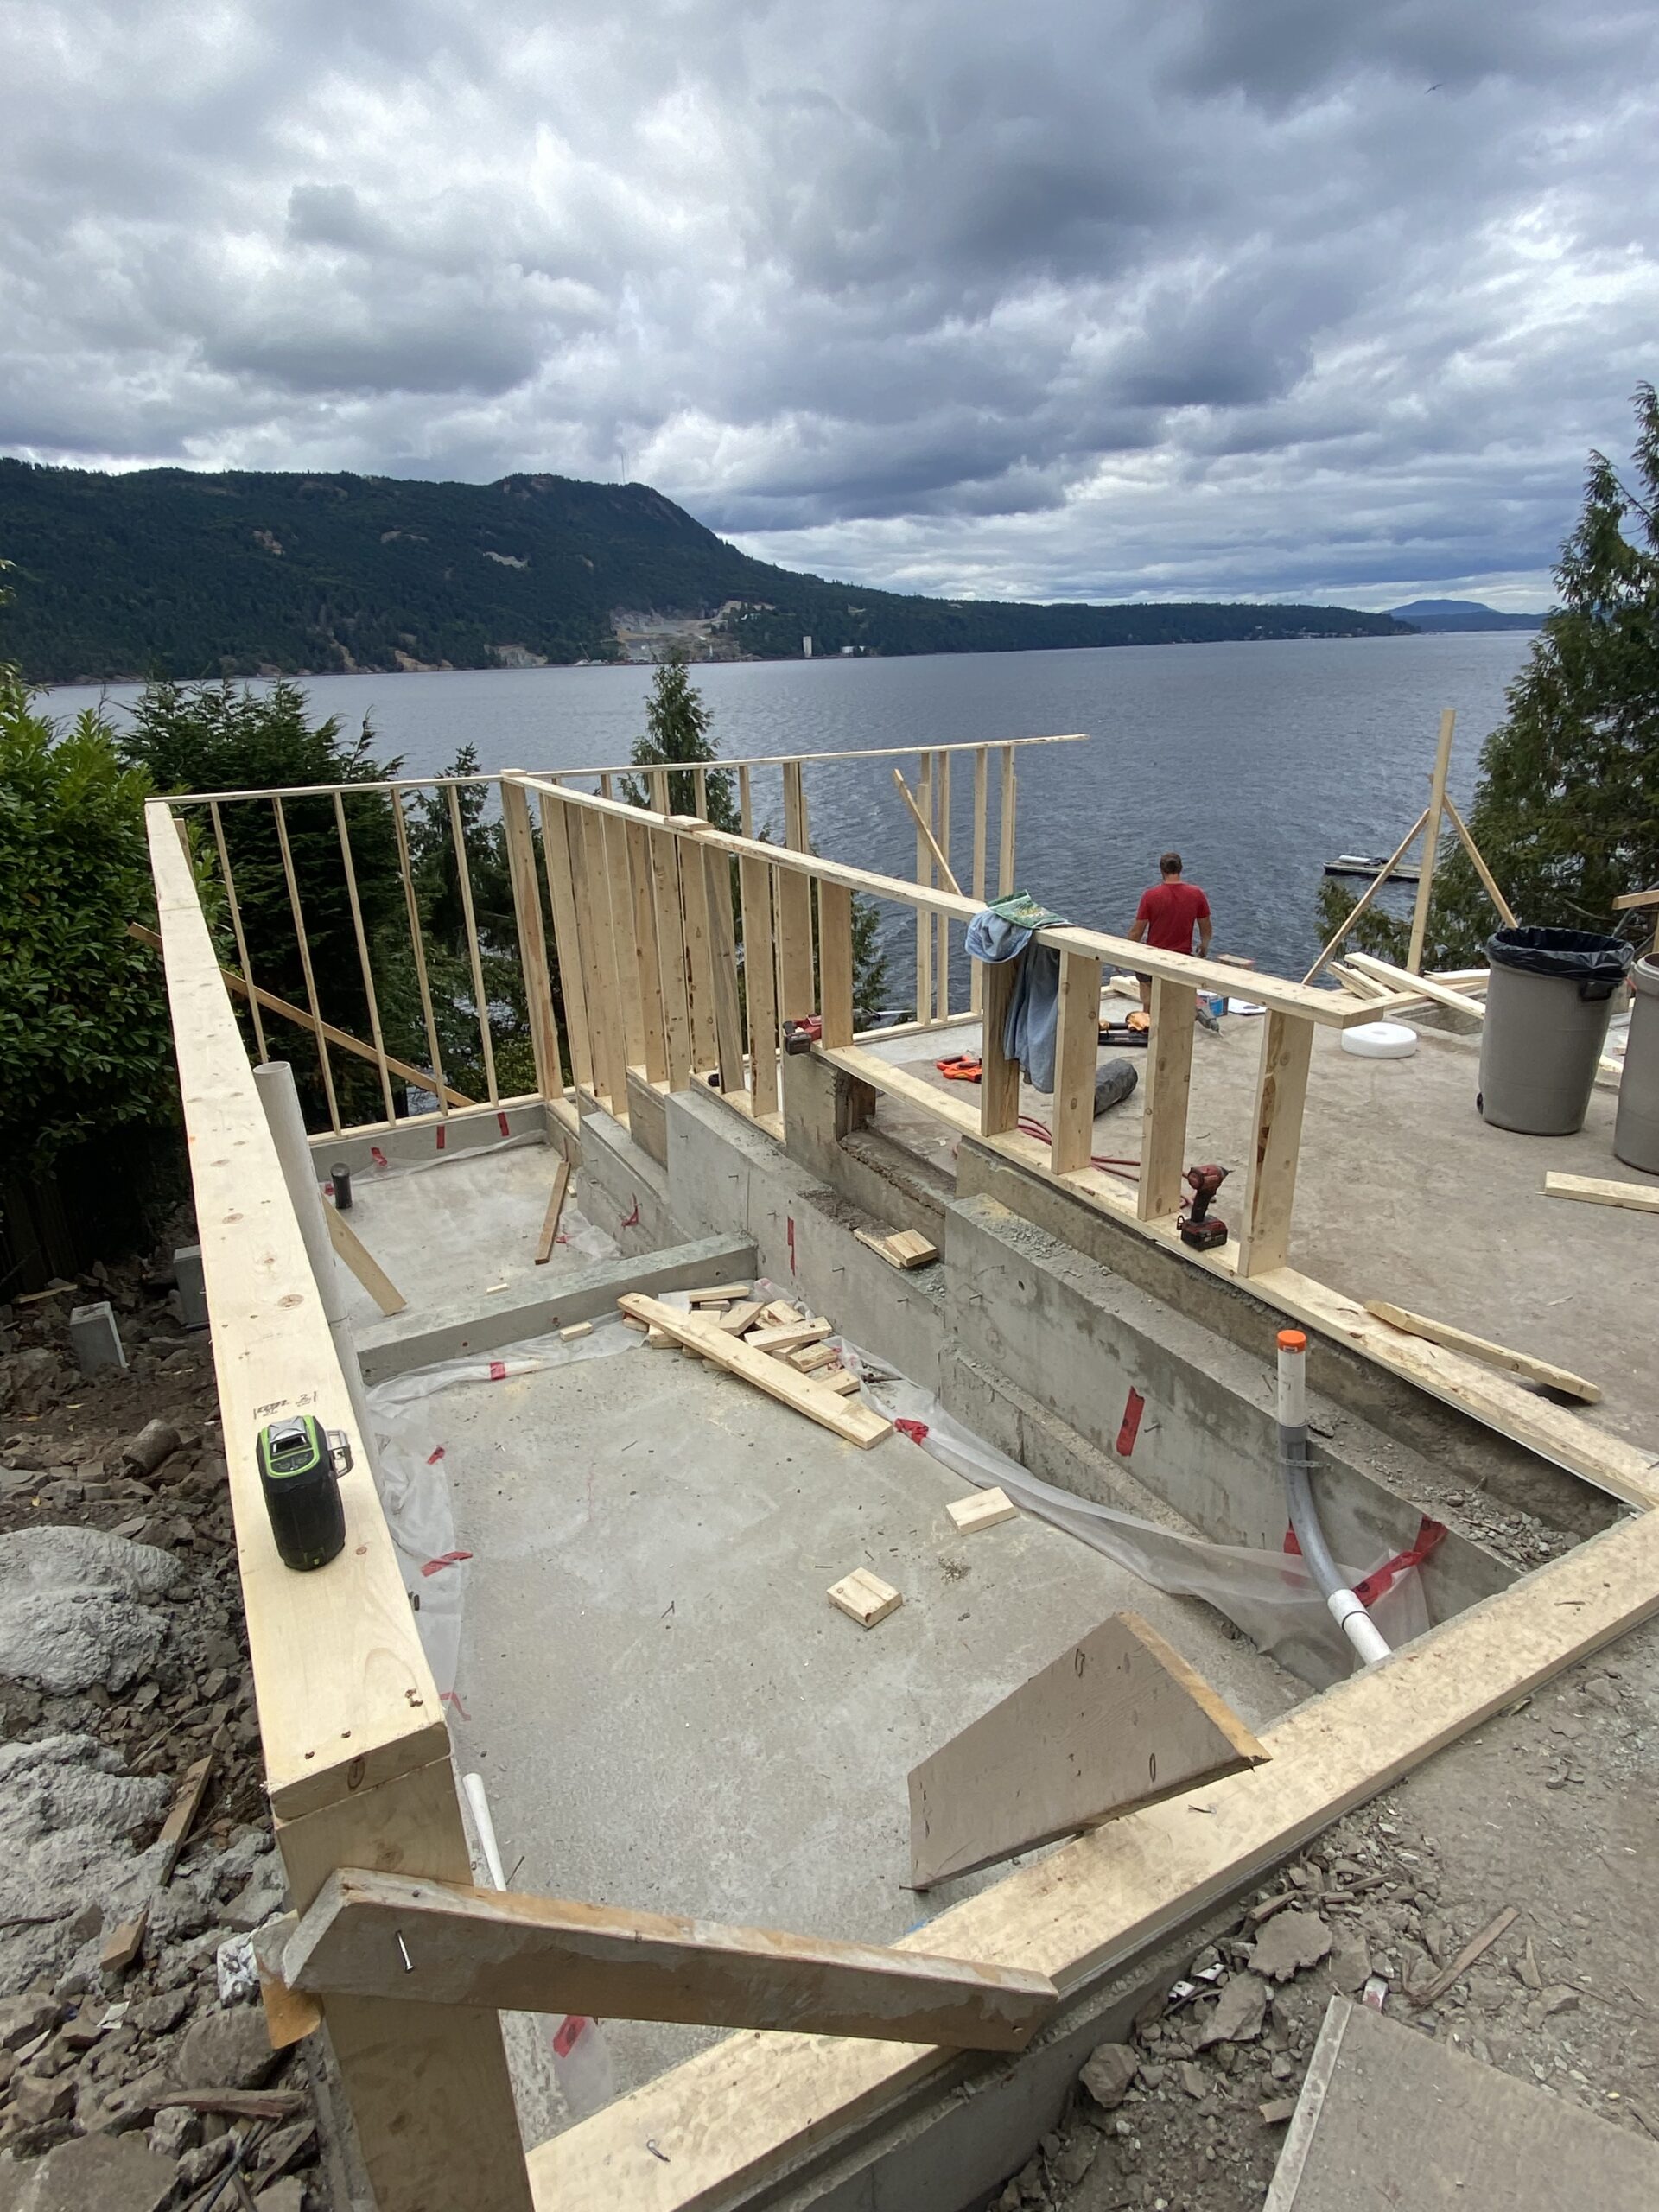 Construction site of house with view of water